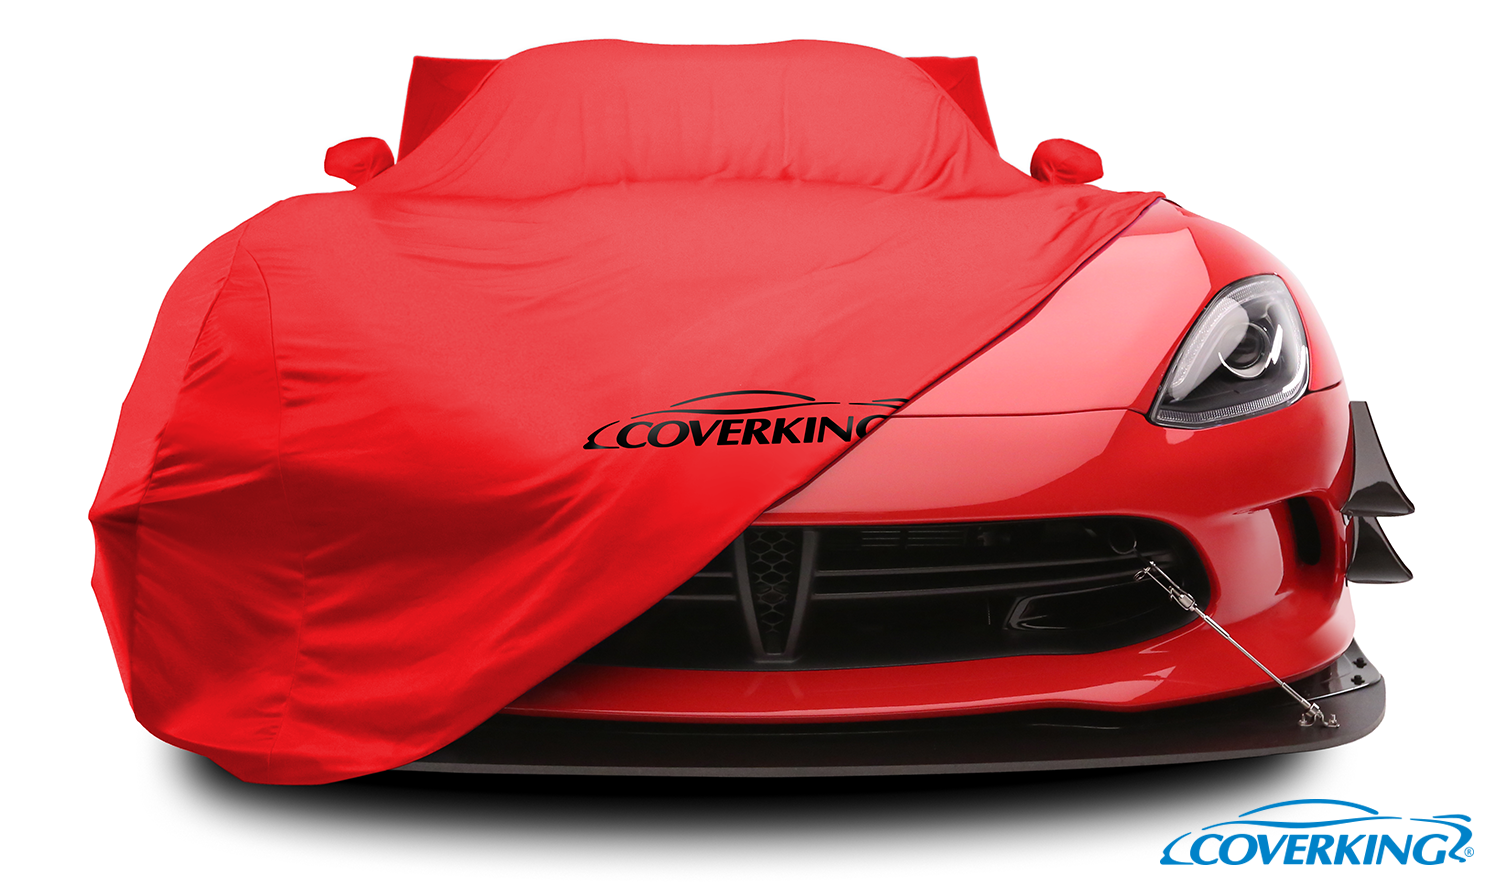 Where to buy car covers (the half car cover style), island side? Wanting to  pick something up today, Kowloon side is inconvenient : r/HongKong